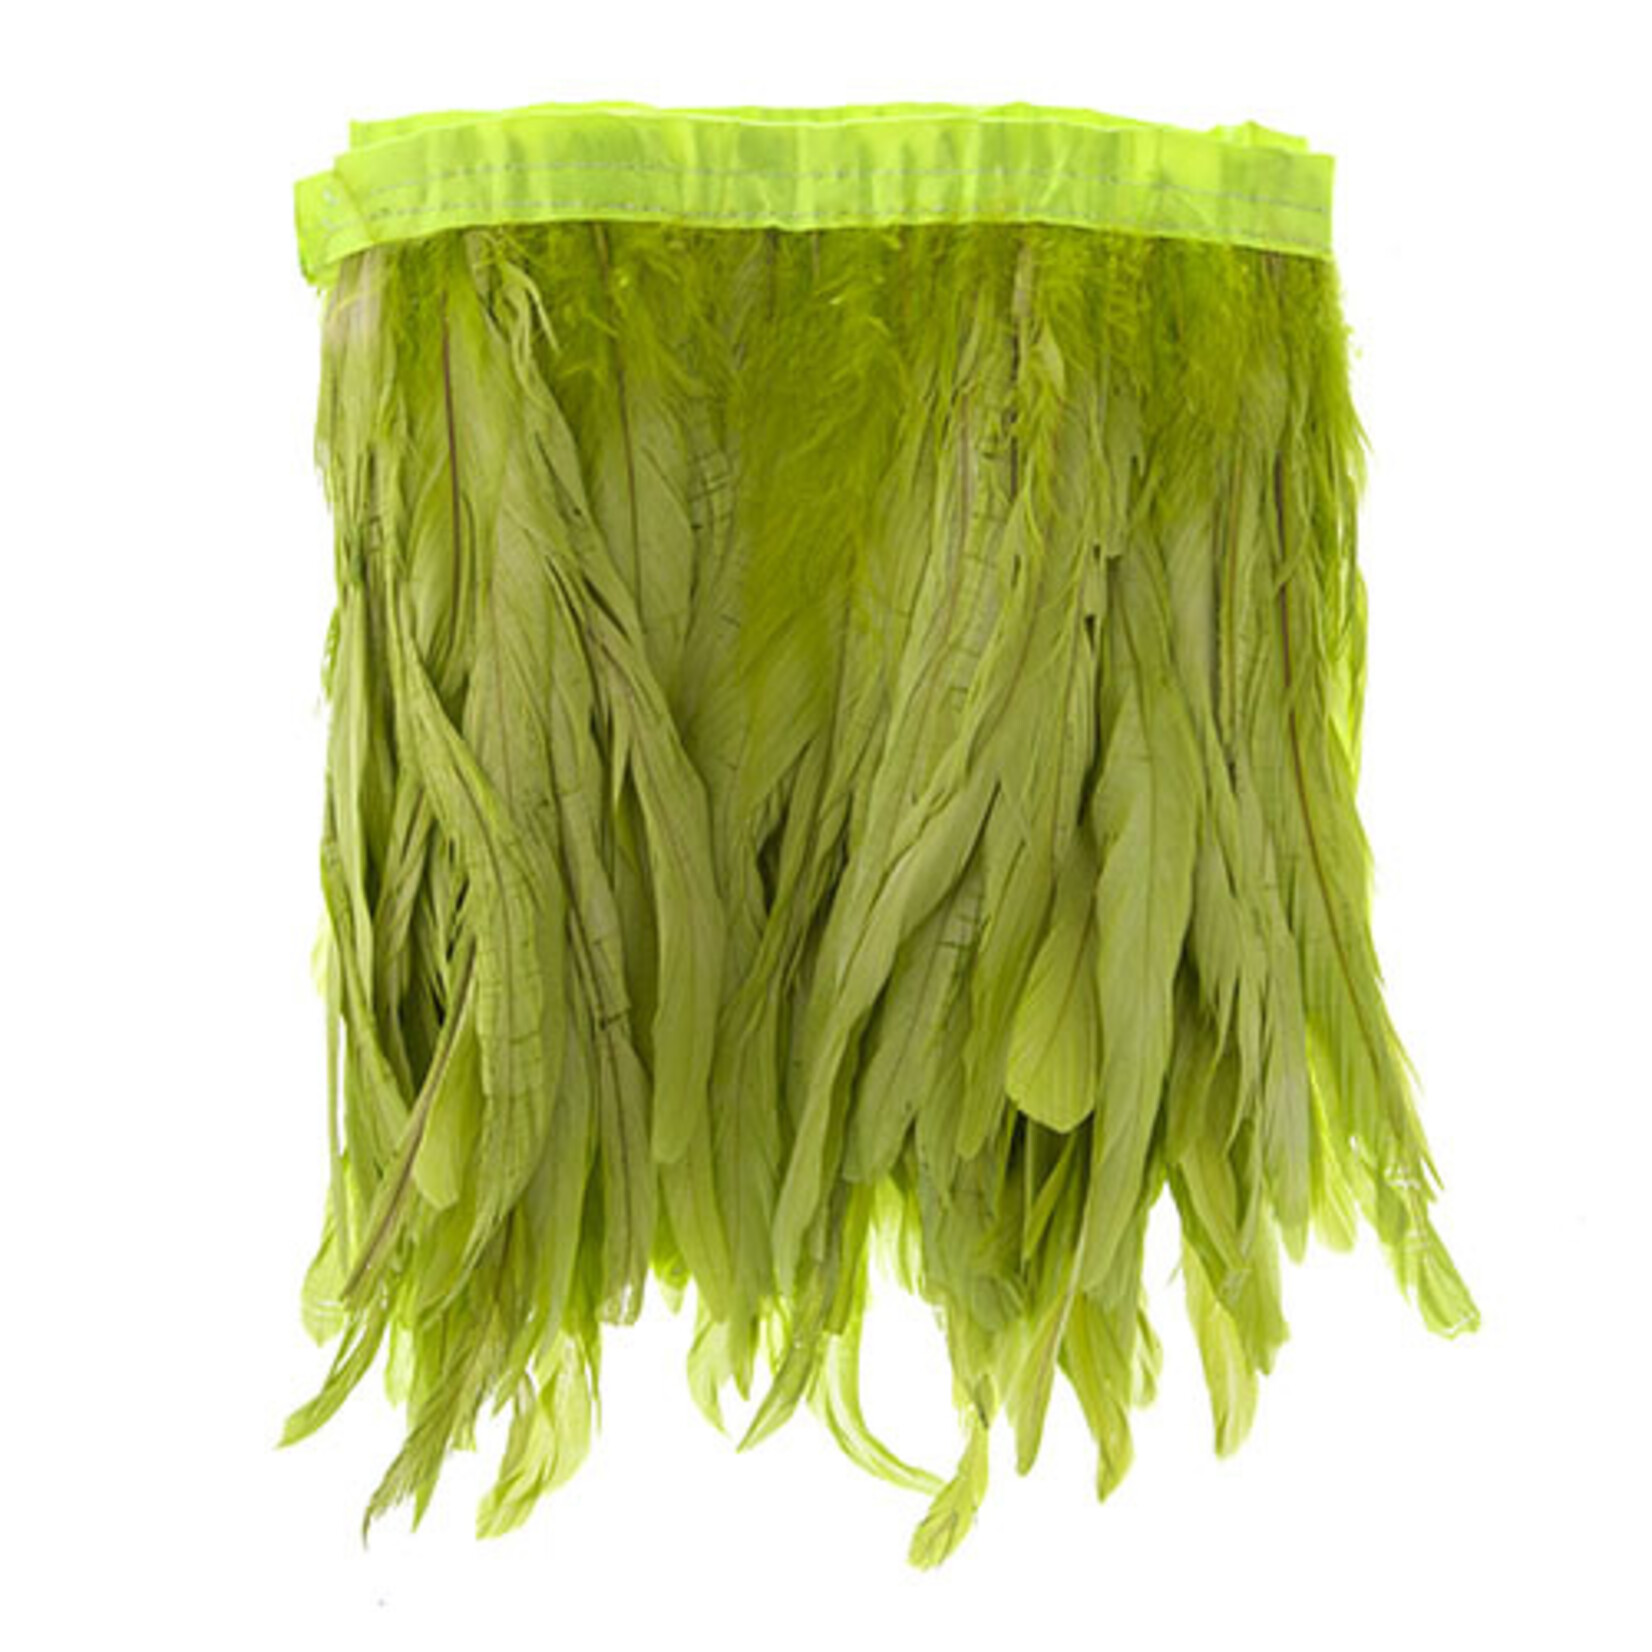 Coque Feathers Value 8-10 Inches 1 Yard  Grass Green